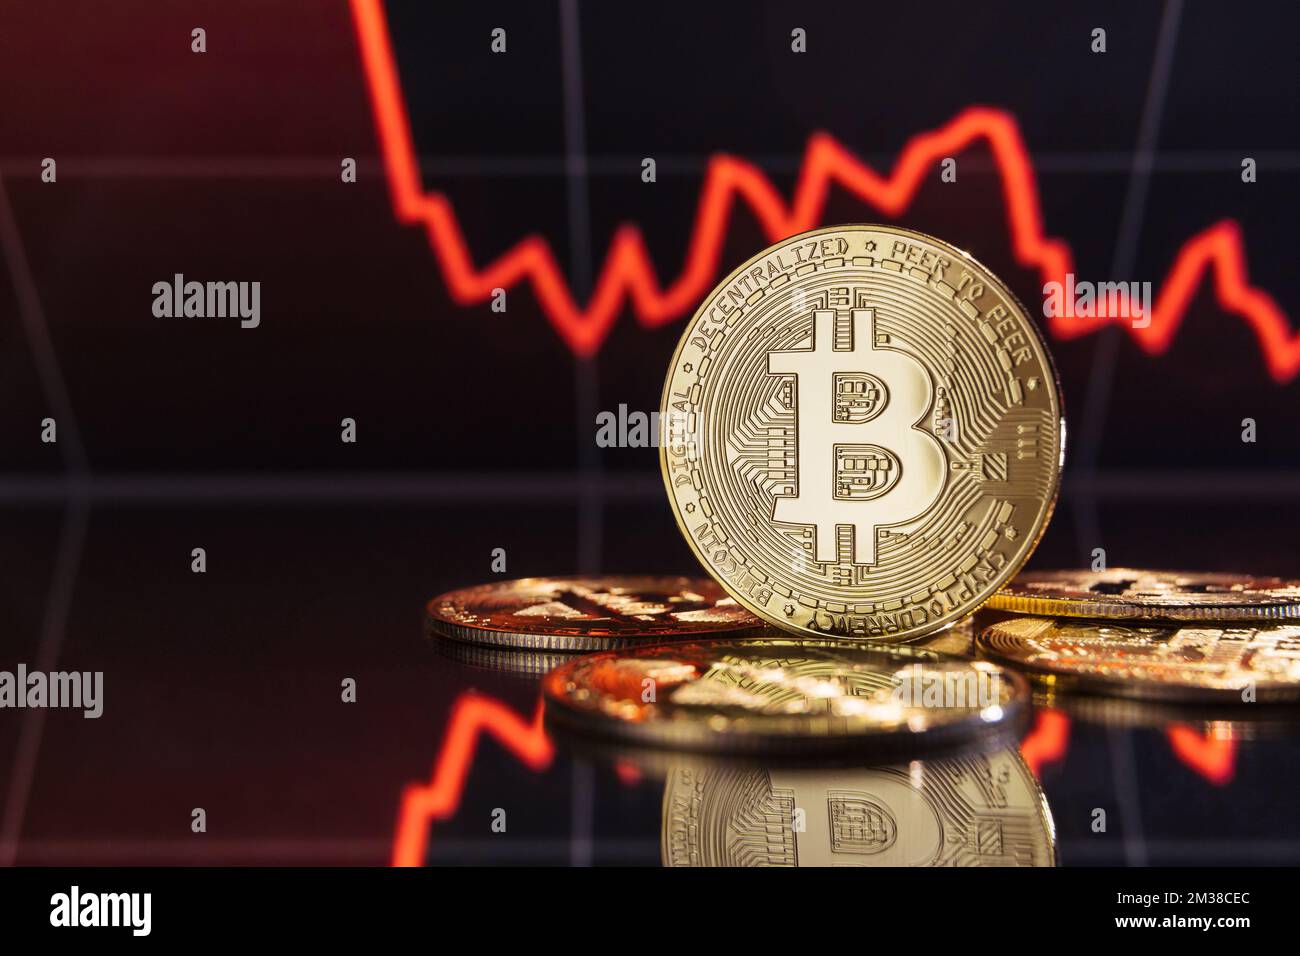 Image of financial crisis and global recession in crypto trading market and investments, golden bitcoin stack on background with digital cryptocurrency chart with red thick line Stock Photo